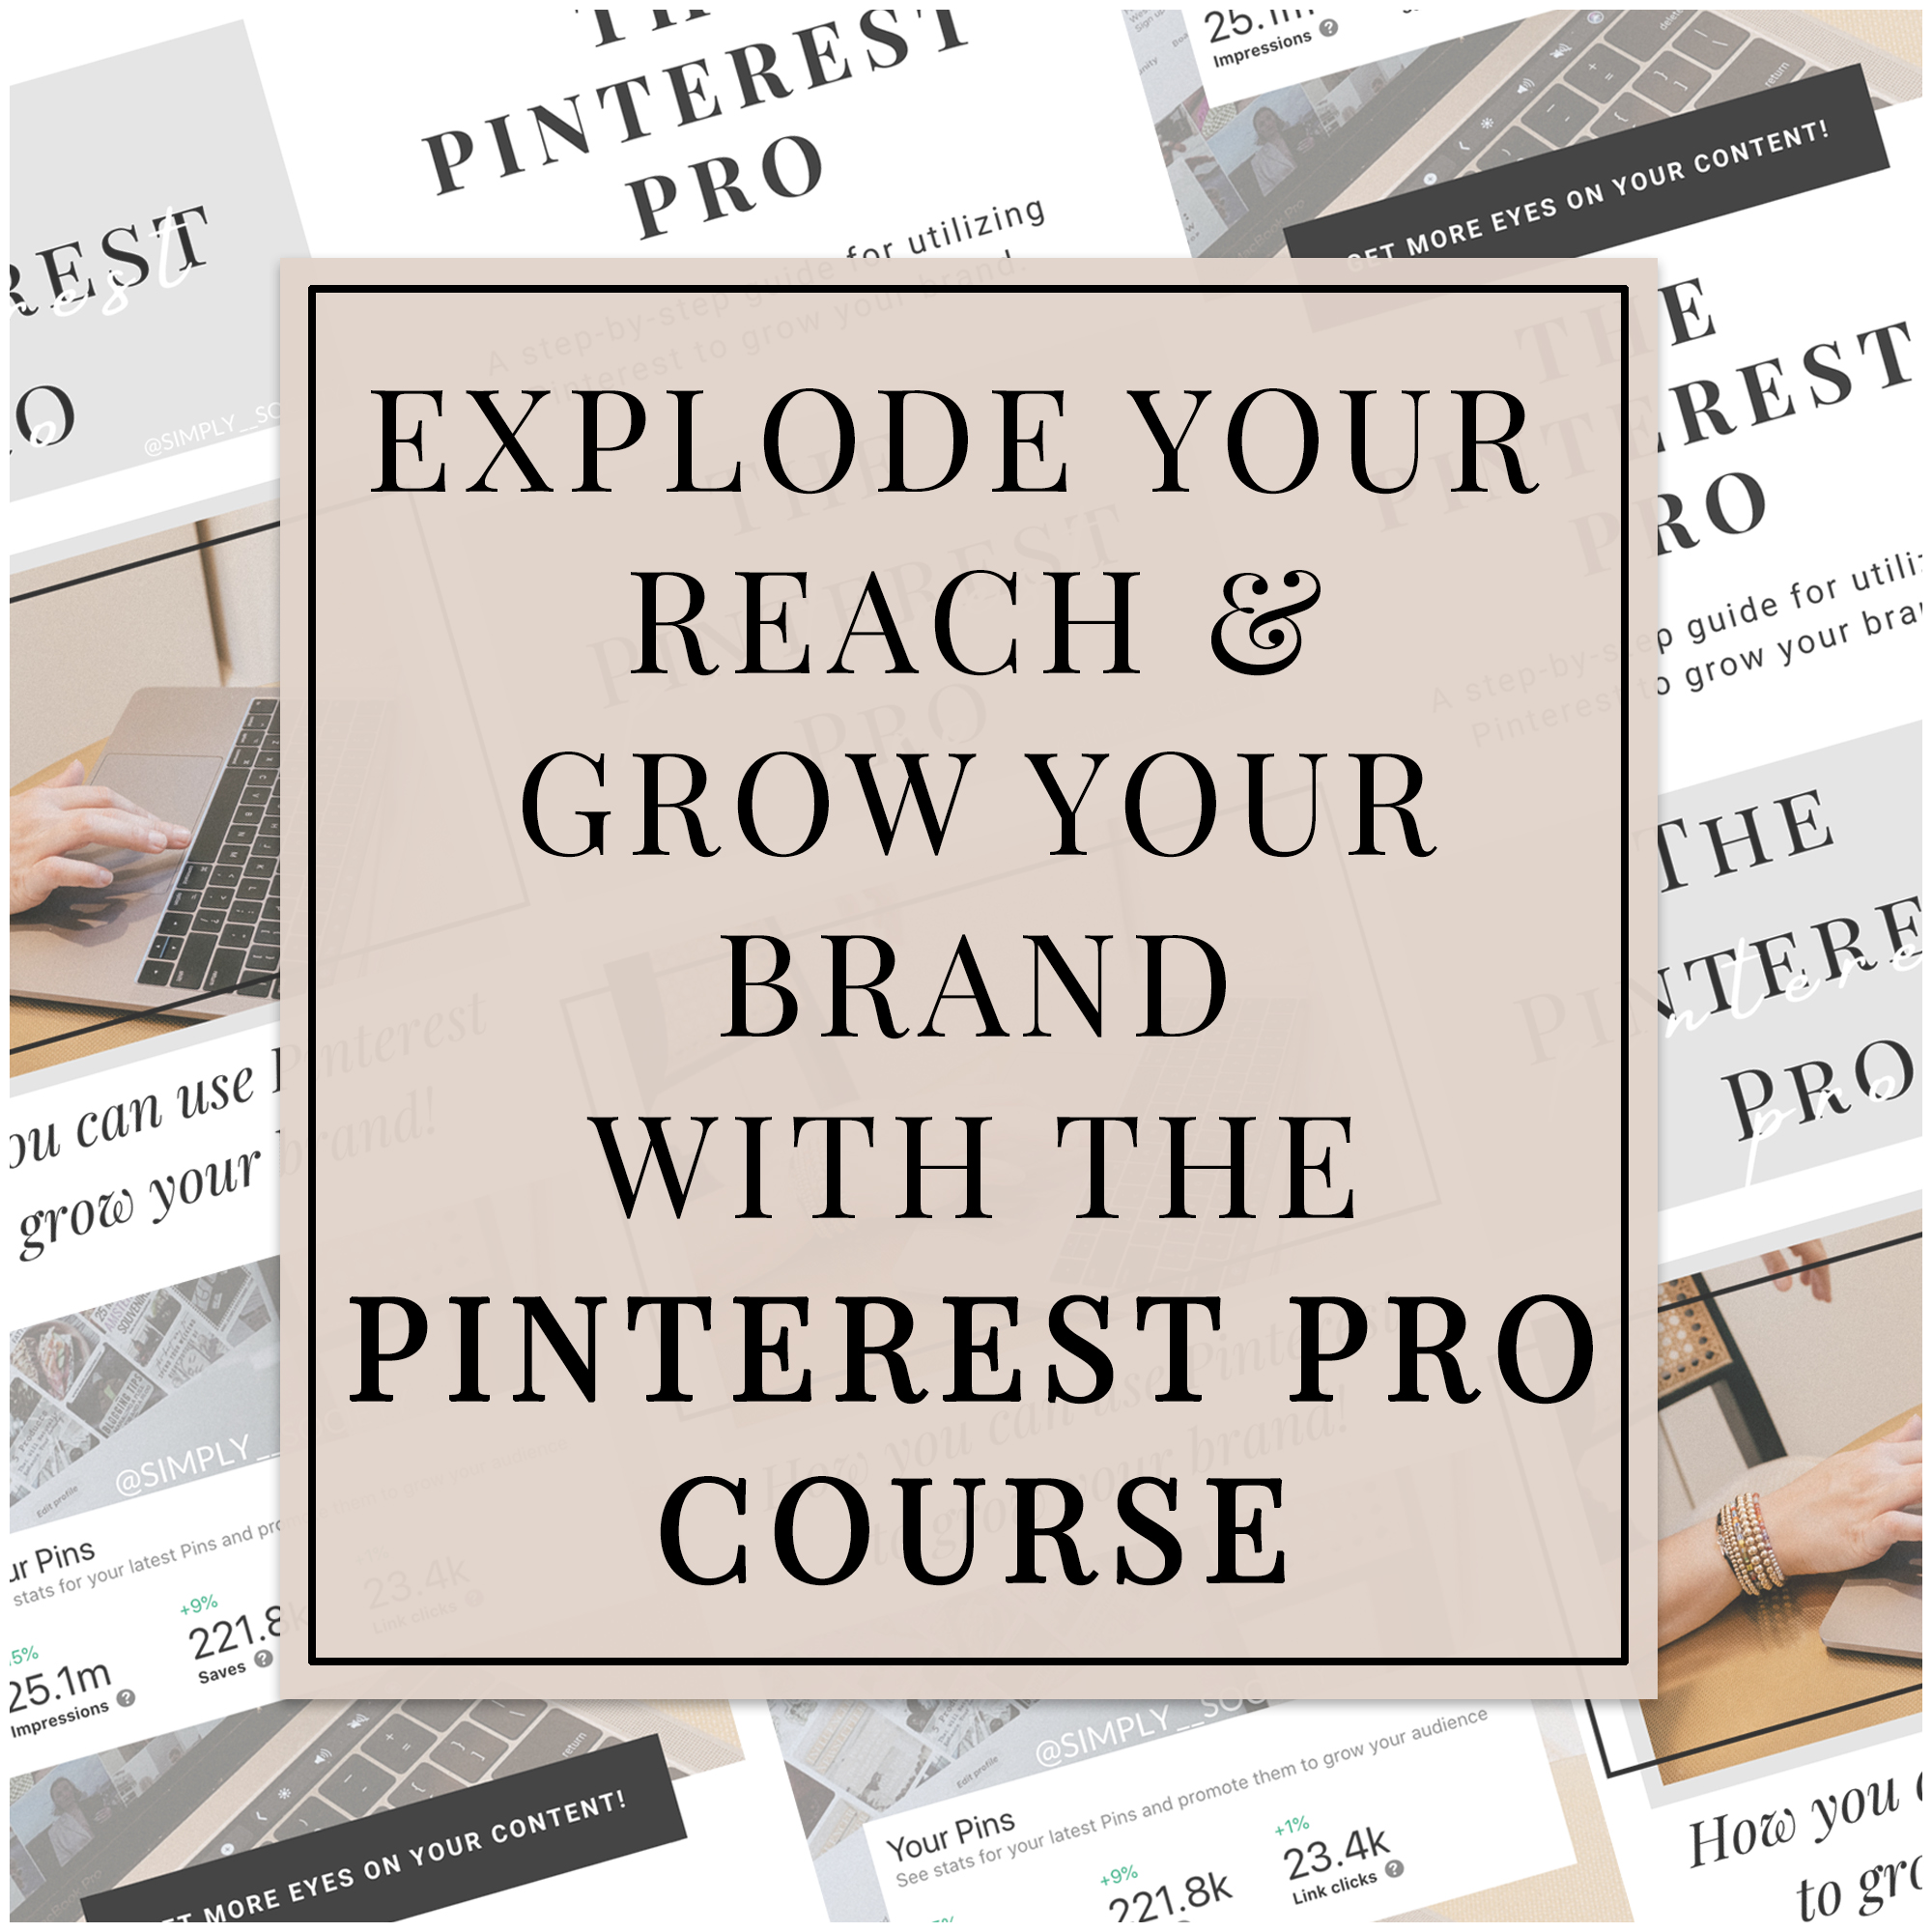 Introducing the Pinterest Pro Course - Explode Your Reach and Grow Your Influence Get More Sales and Brand Deals #pinterest #course #pinterestcourse #growth #influencer #influencergrowth #instagramgrowth #tiktokgrowth #community #socialmediatips #ecourse by Simply Society - Simply by Simone - Simone Piliero #pinterest #pinterestcourse #influencertips #bloggertips #bloggereducation #blogger #influencer #instagramgrowth